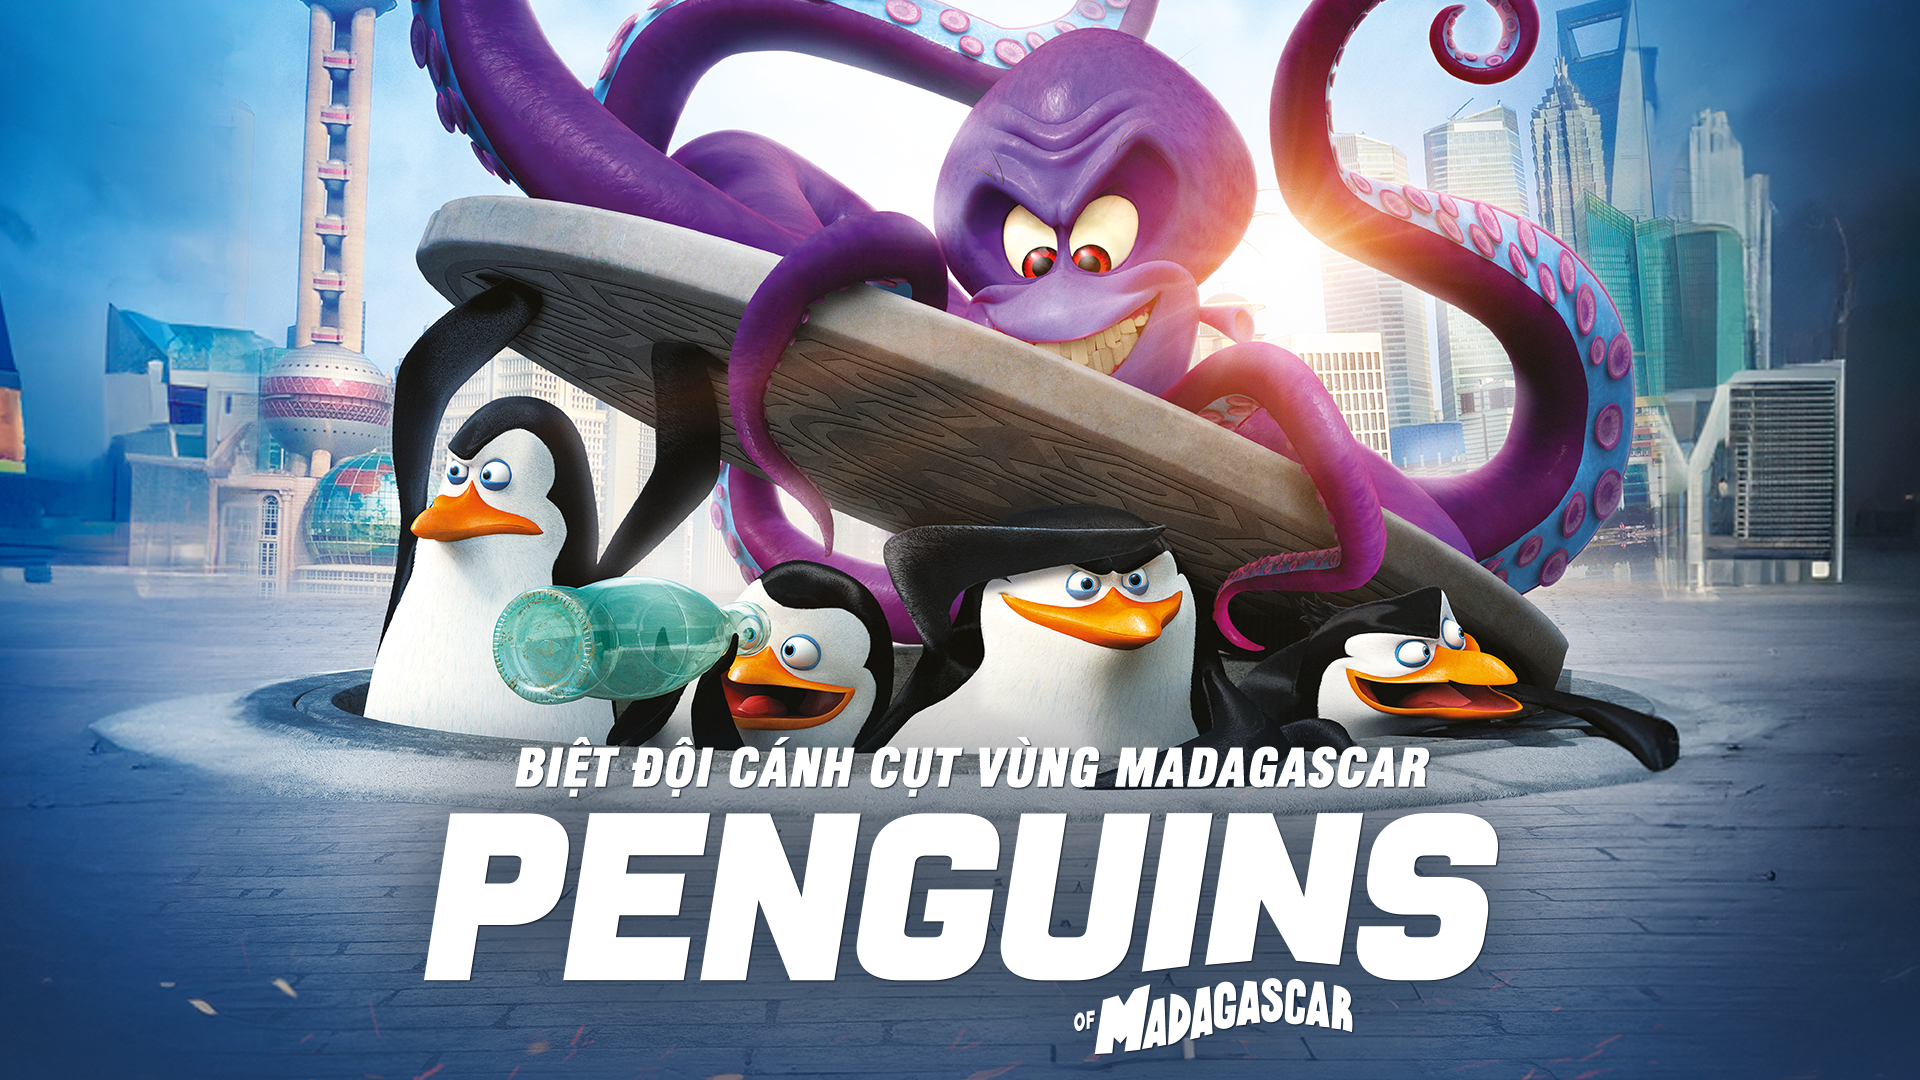 Penguins of Madagascar: The Movie / Penguins of Madagascar: The Movie (2014)